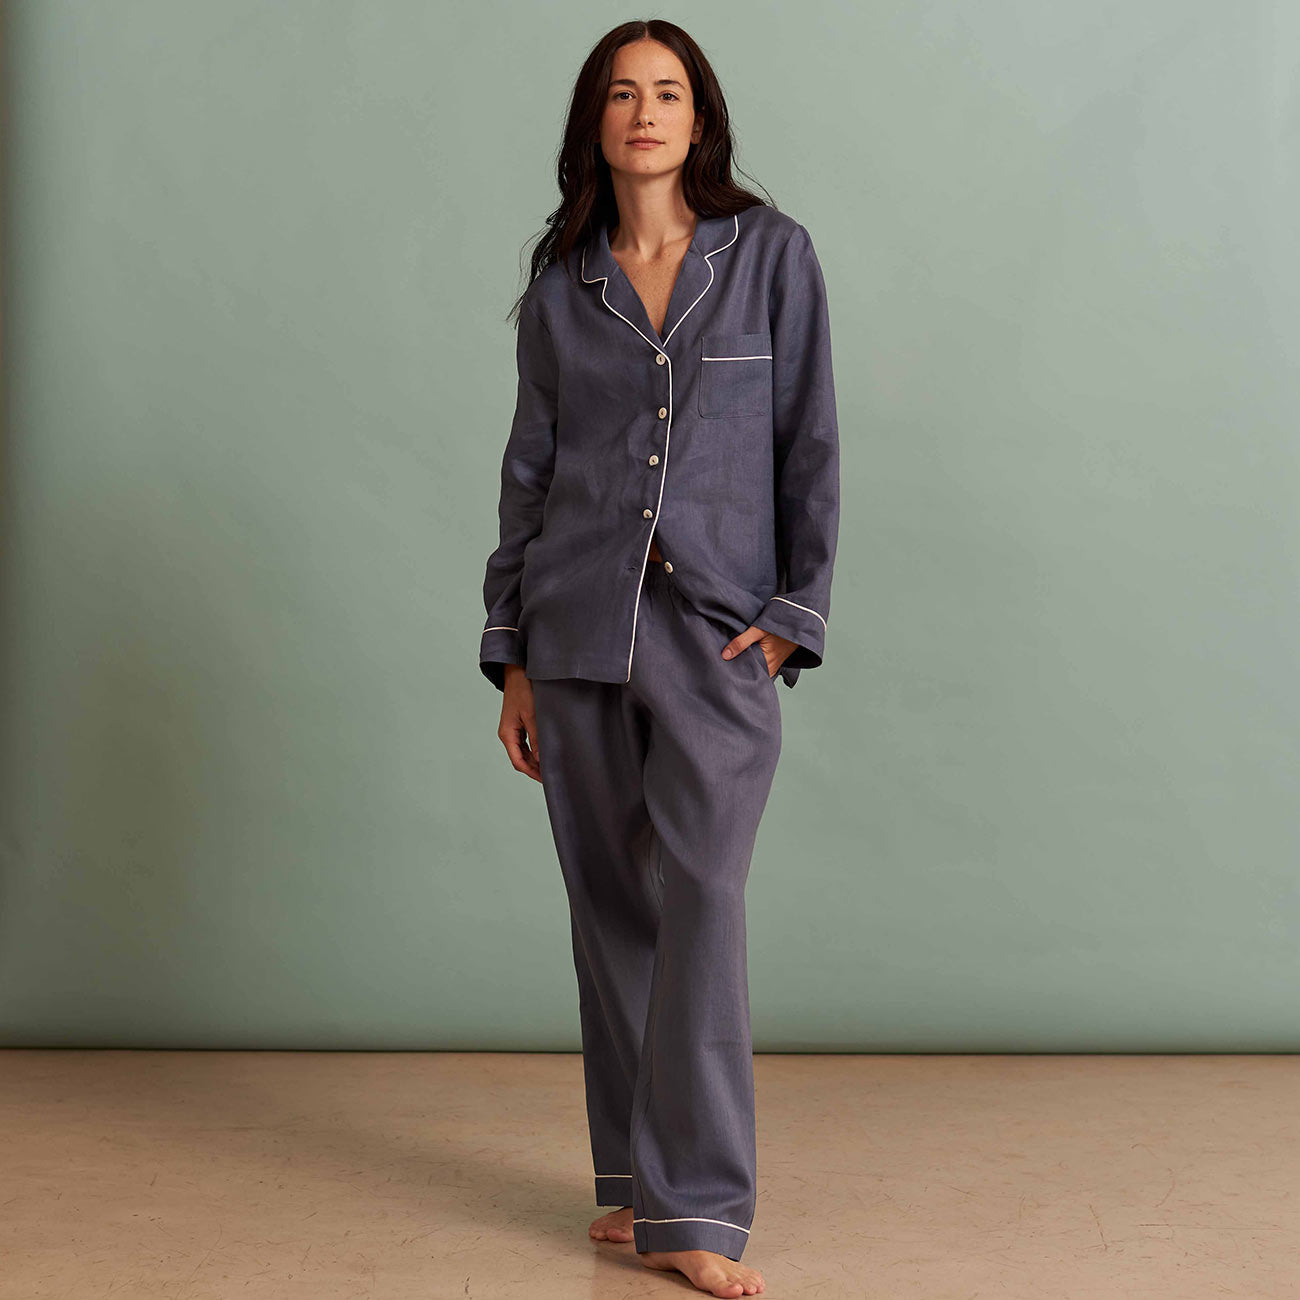 100% European Linen Long Sleeve Pajama Set with Piping